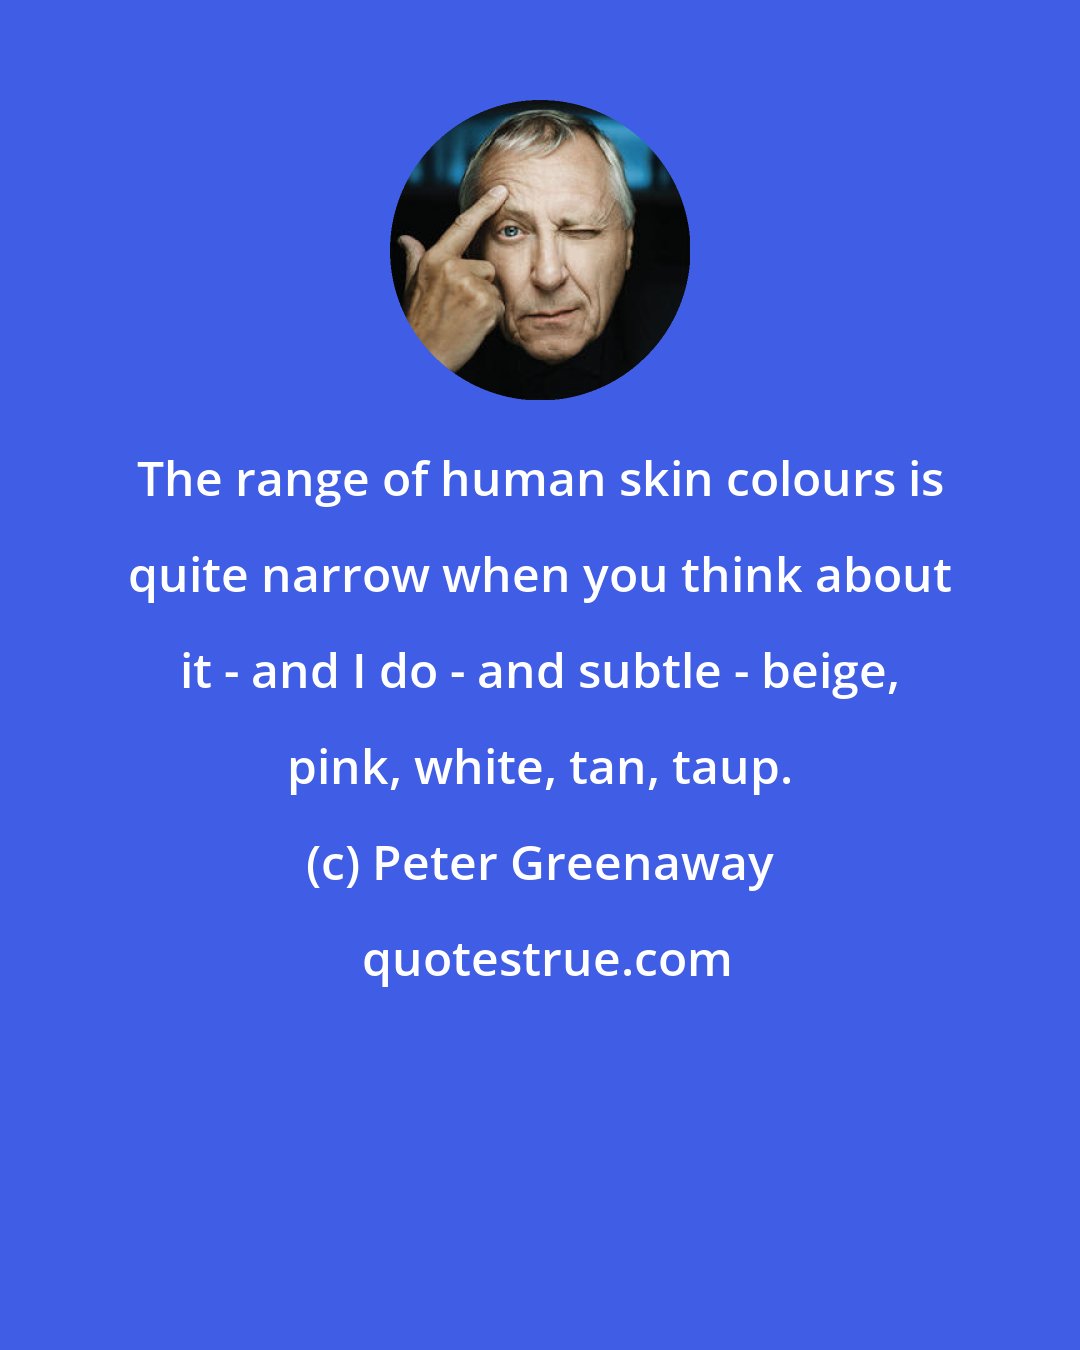 Peter Greenaway: The range of human skin colours is quite narrow when you think about it - and I do - and subtle - beige, pink, white, tan, taup.